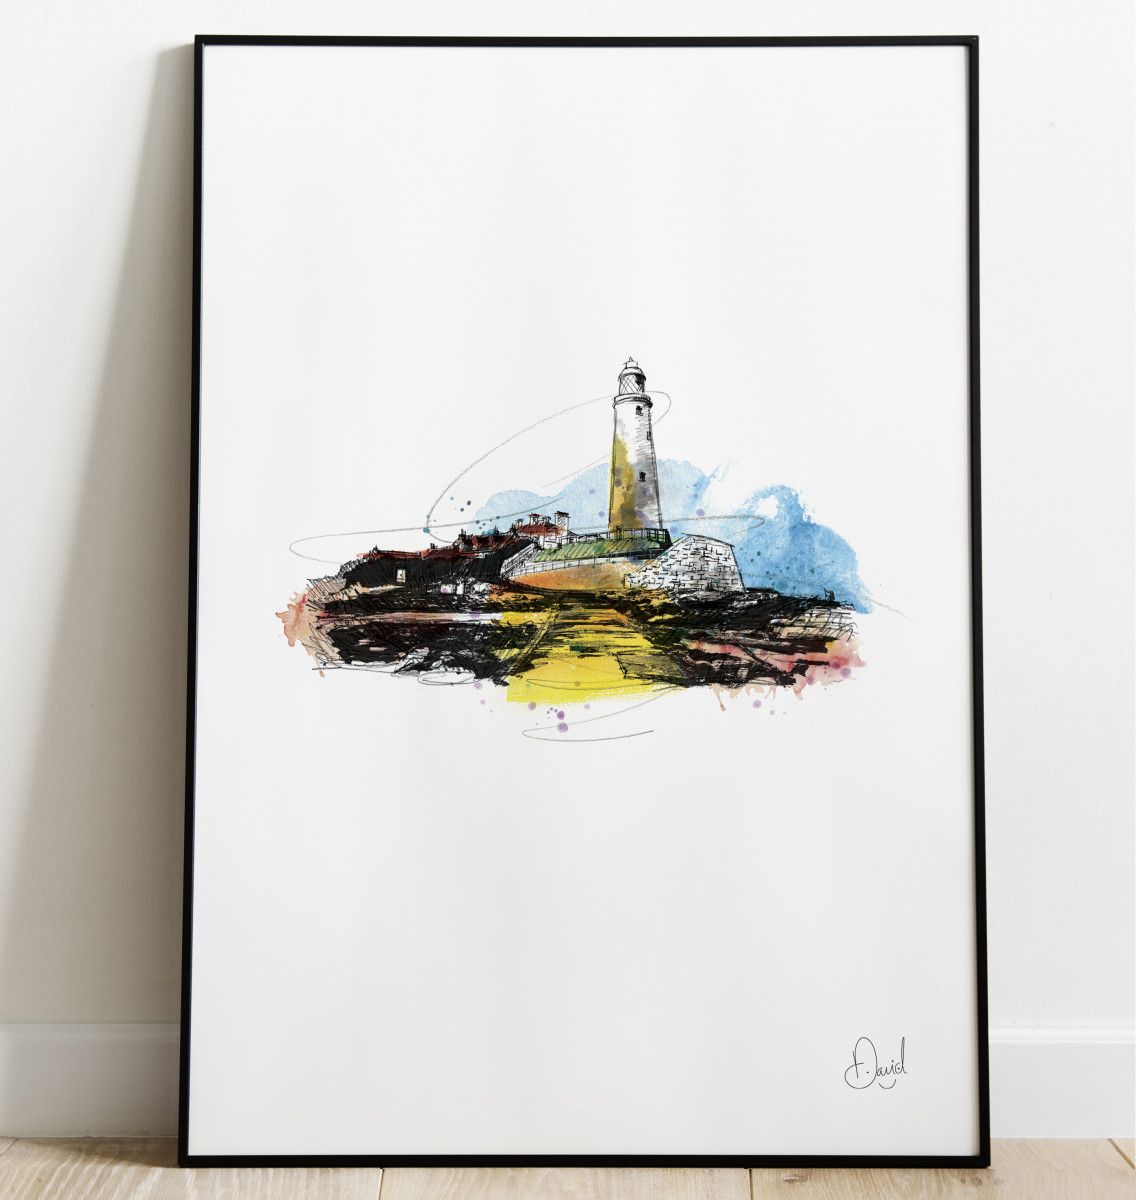 Newcastle whitley Bay – St Mary's Lighthouse art print